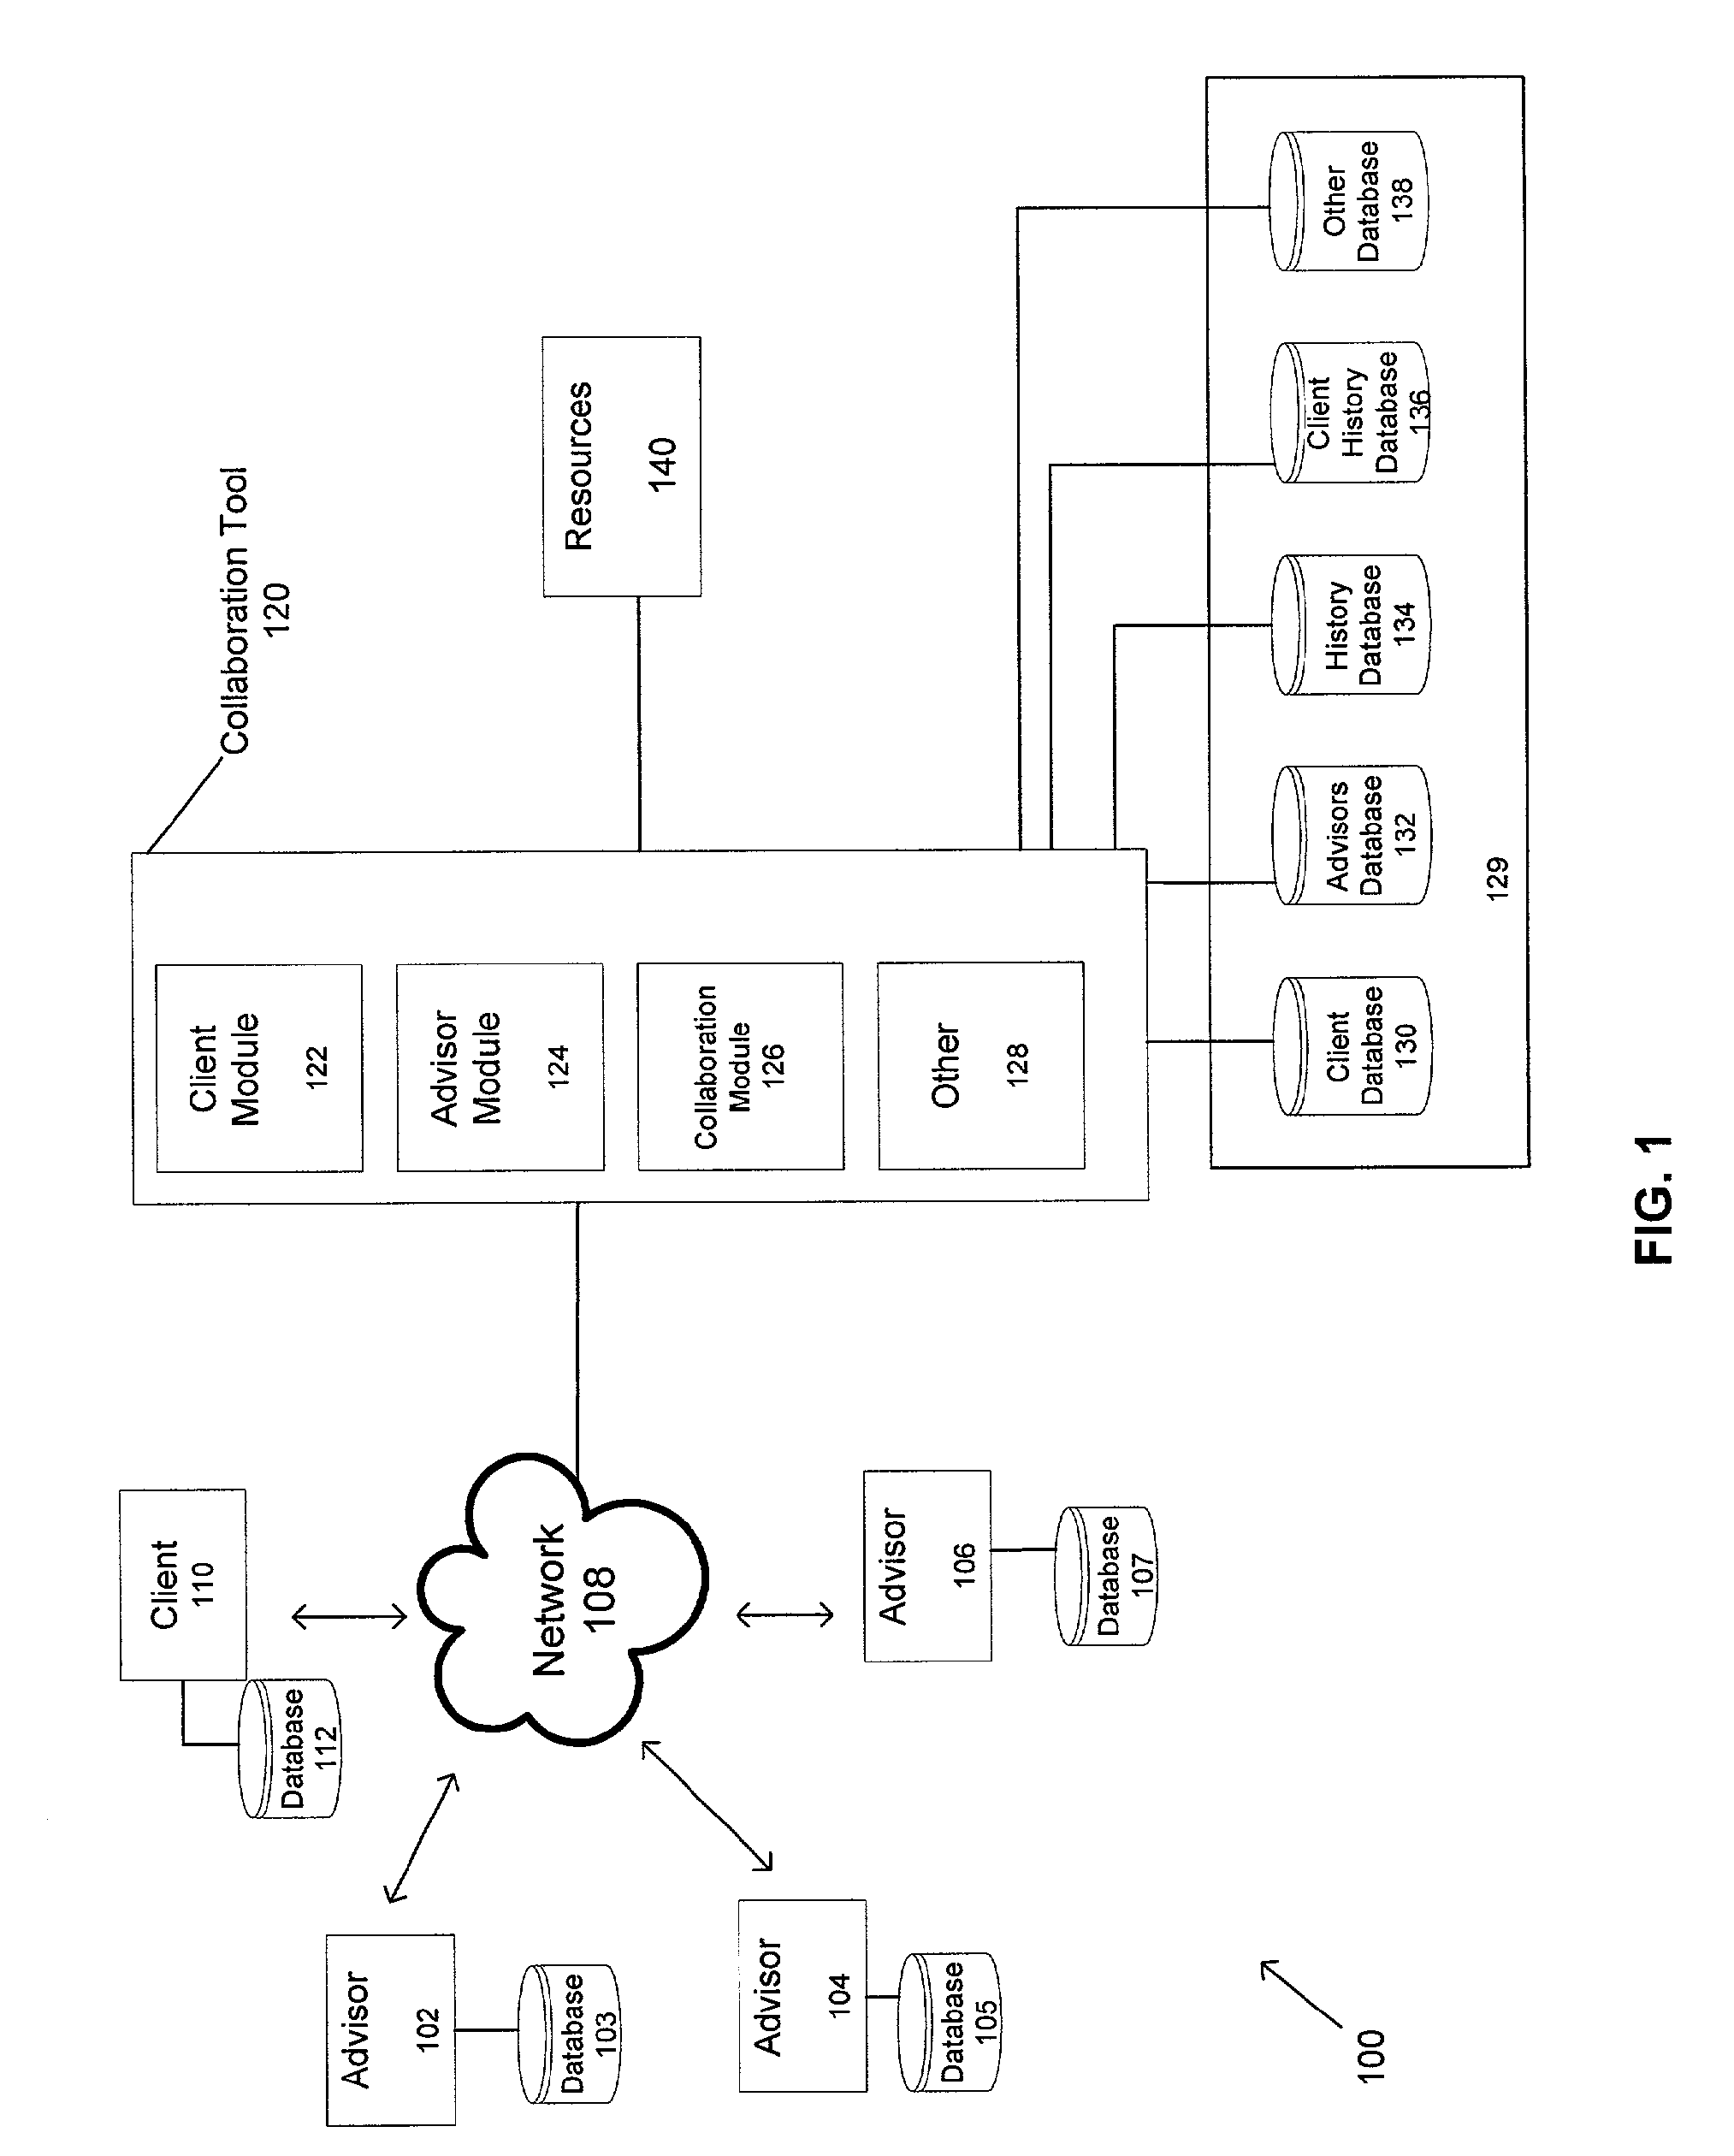 Method and system for enabling collaboration between advisors and clients